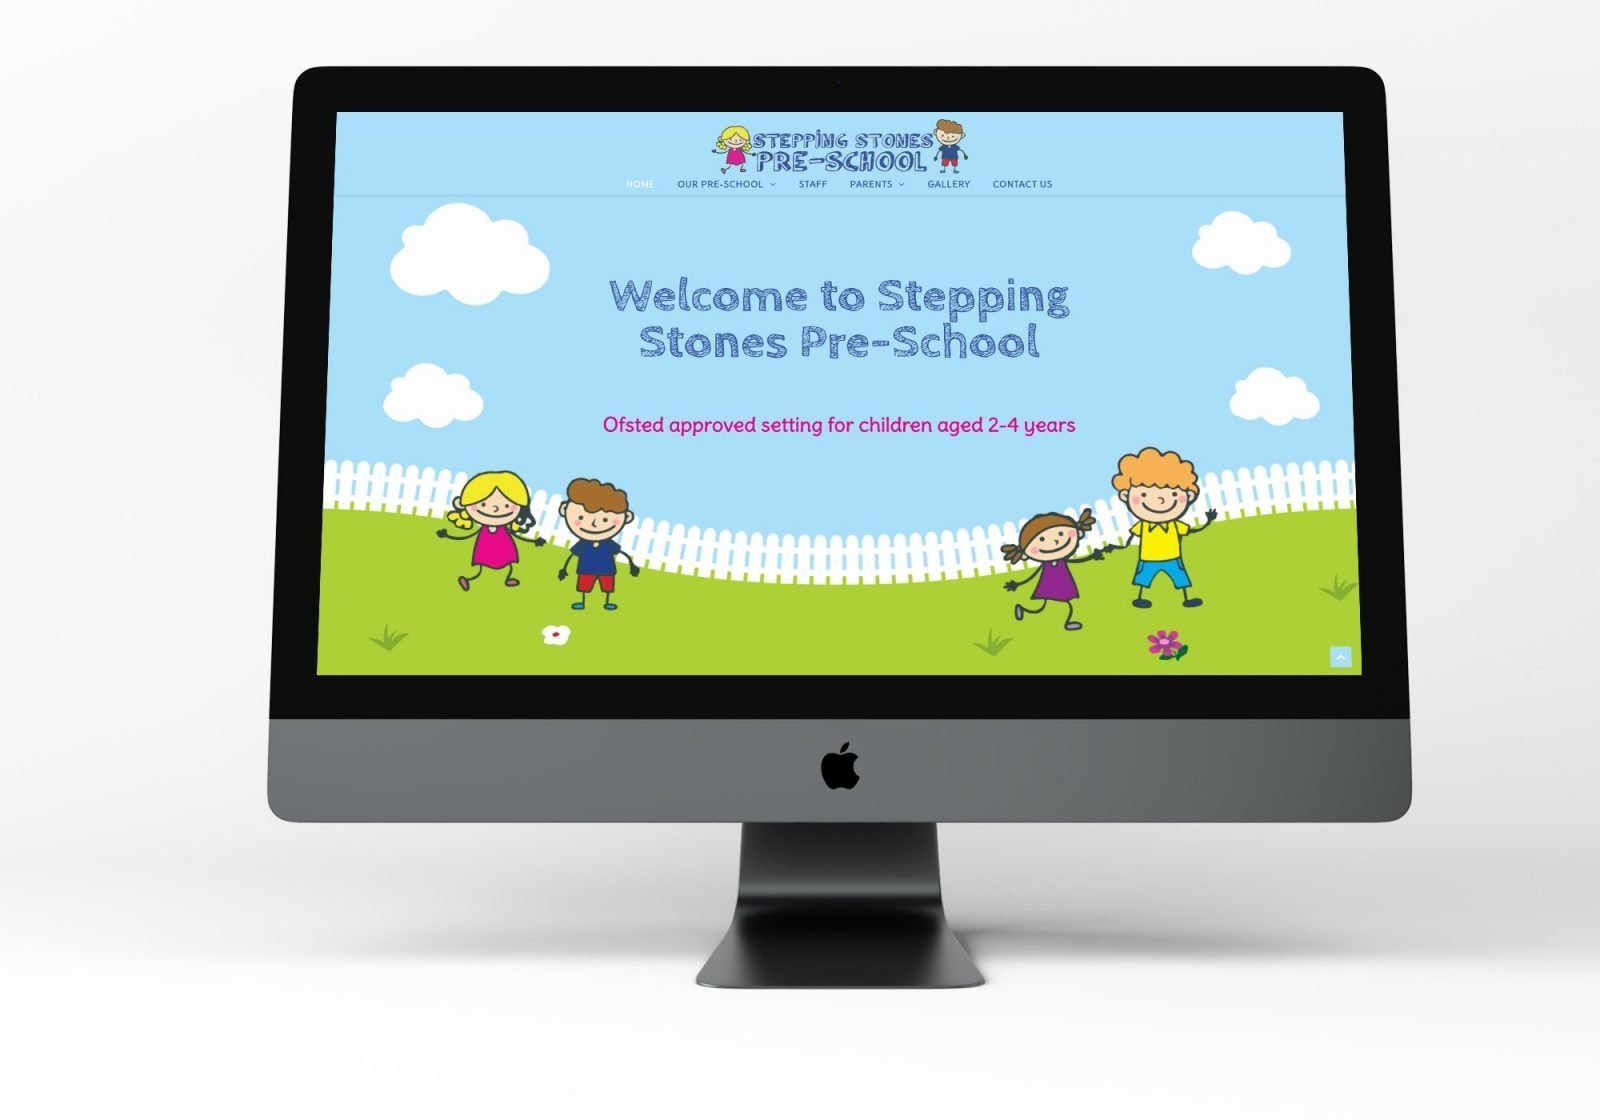 A omputer showing the home page for Stepping Stones Pre-School website design